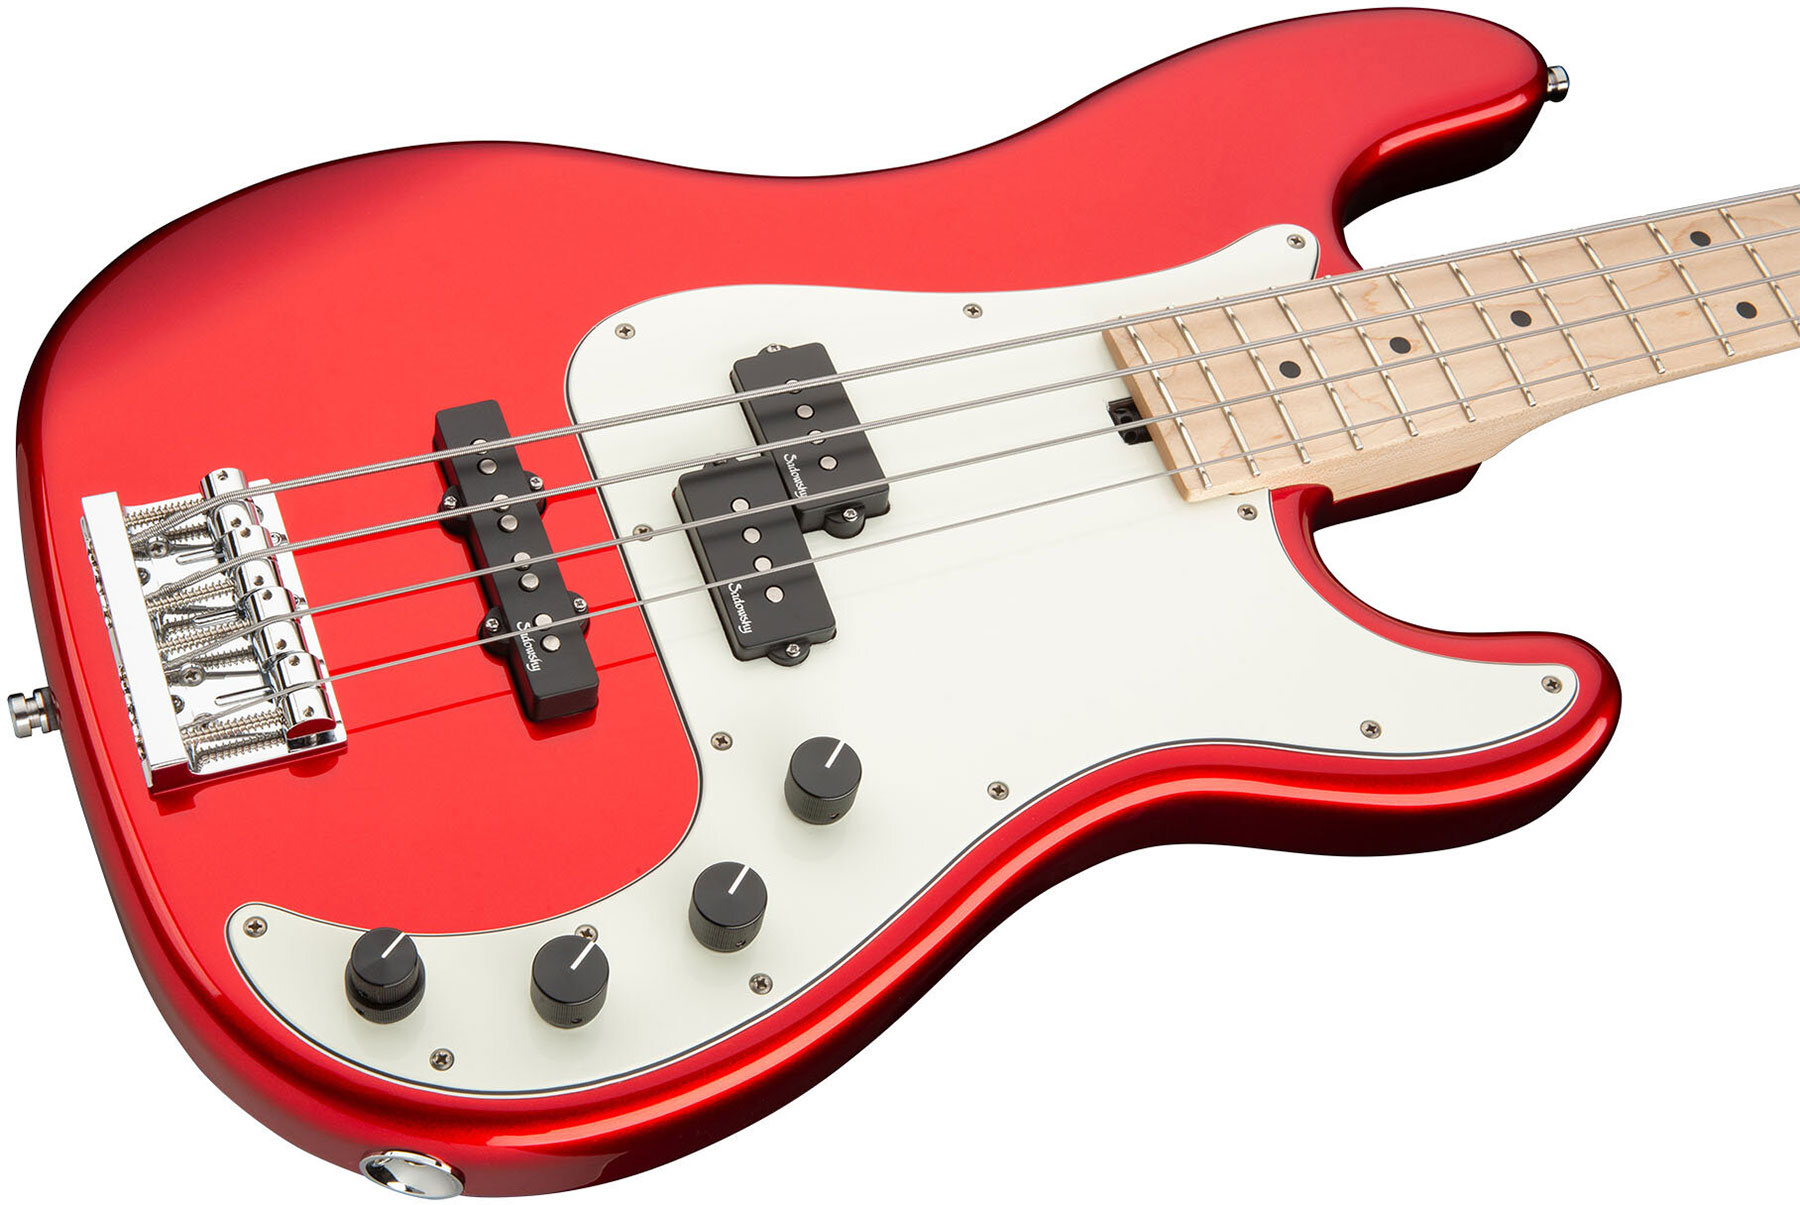 Sadowsky Hybrid P/j Bass 21 Fret Ash 4c Metroline All Active Mn - Solid Candy Apple Red - Solidbody E-bass - Variation 2